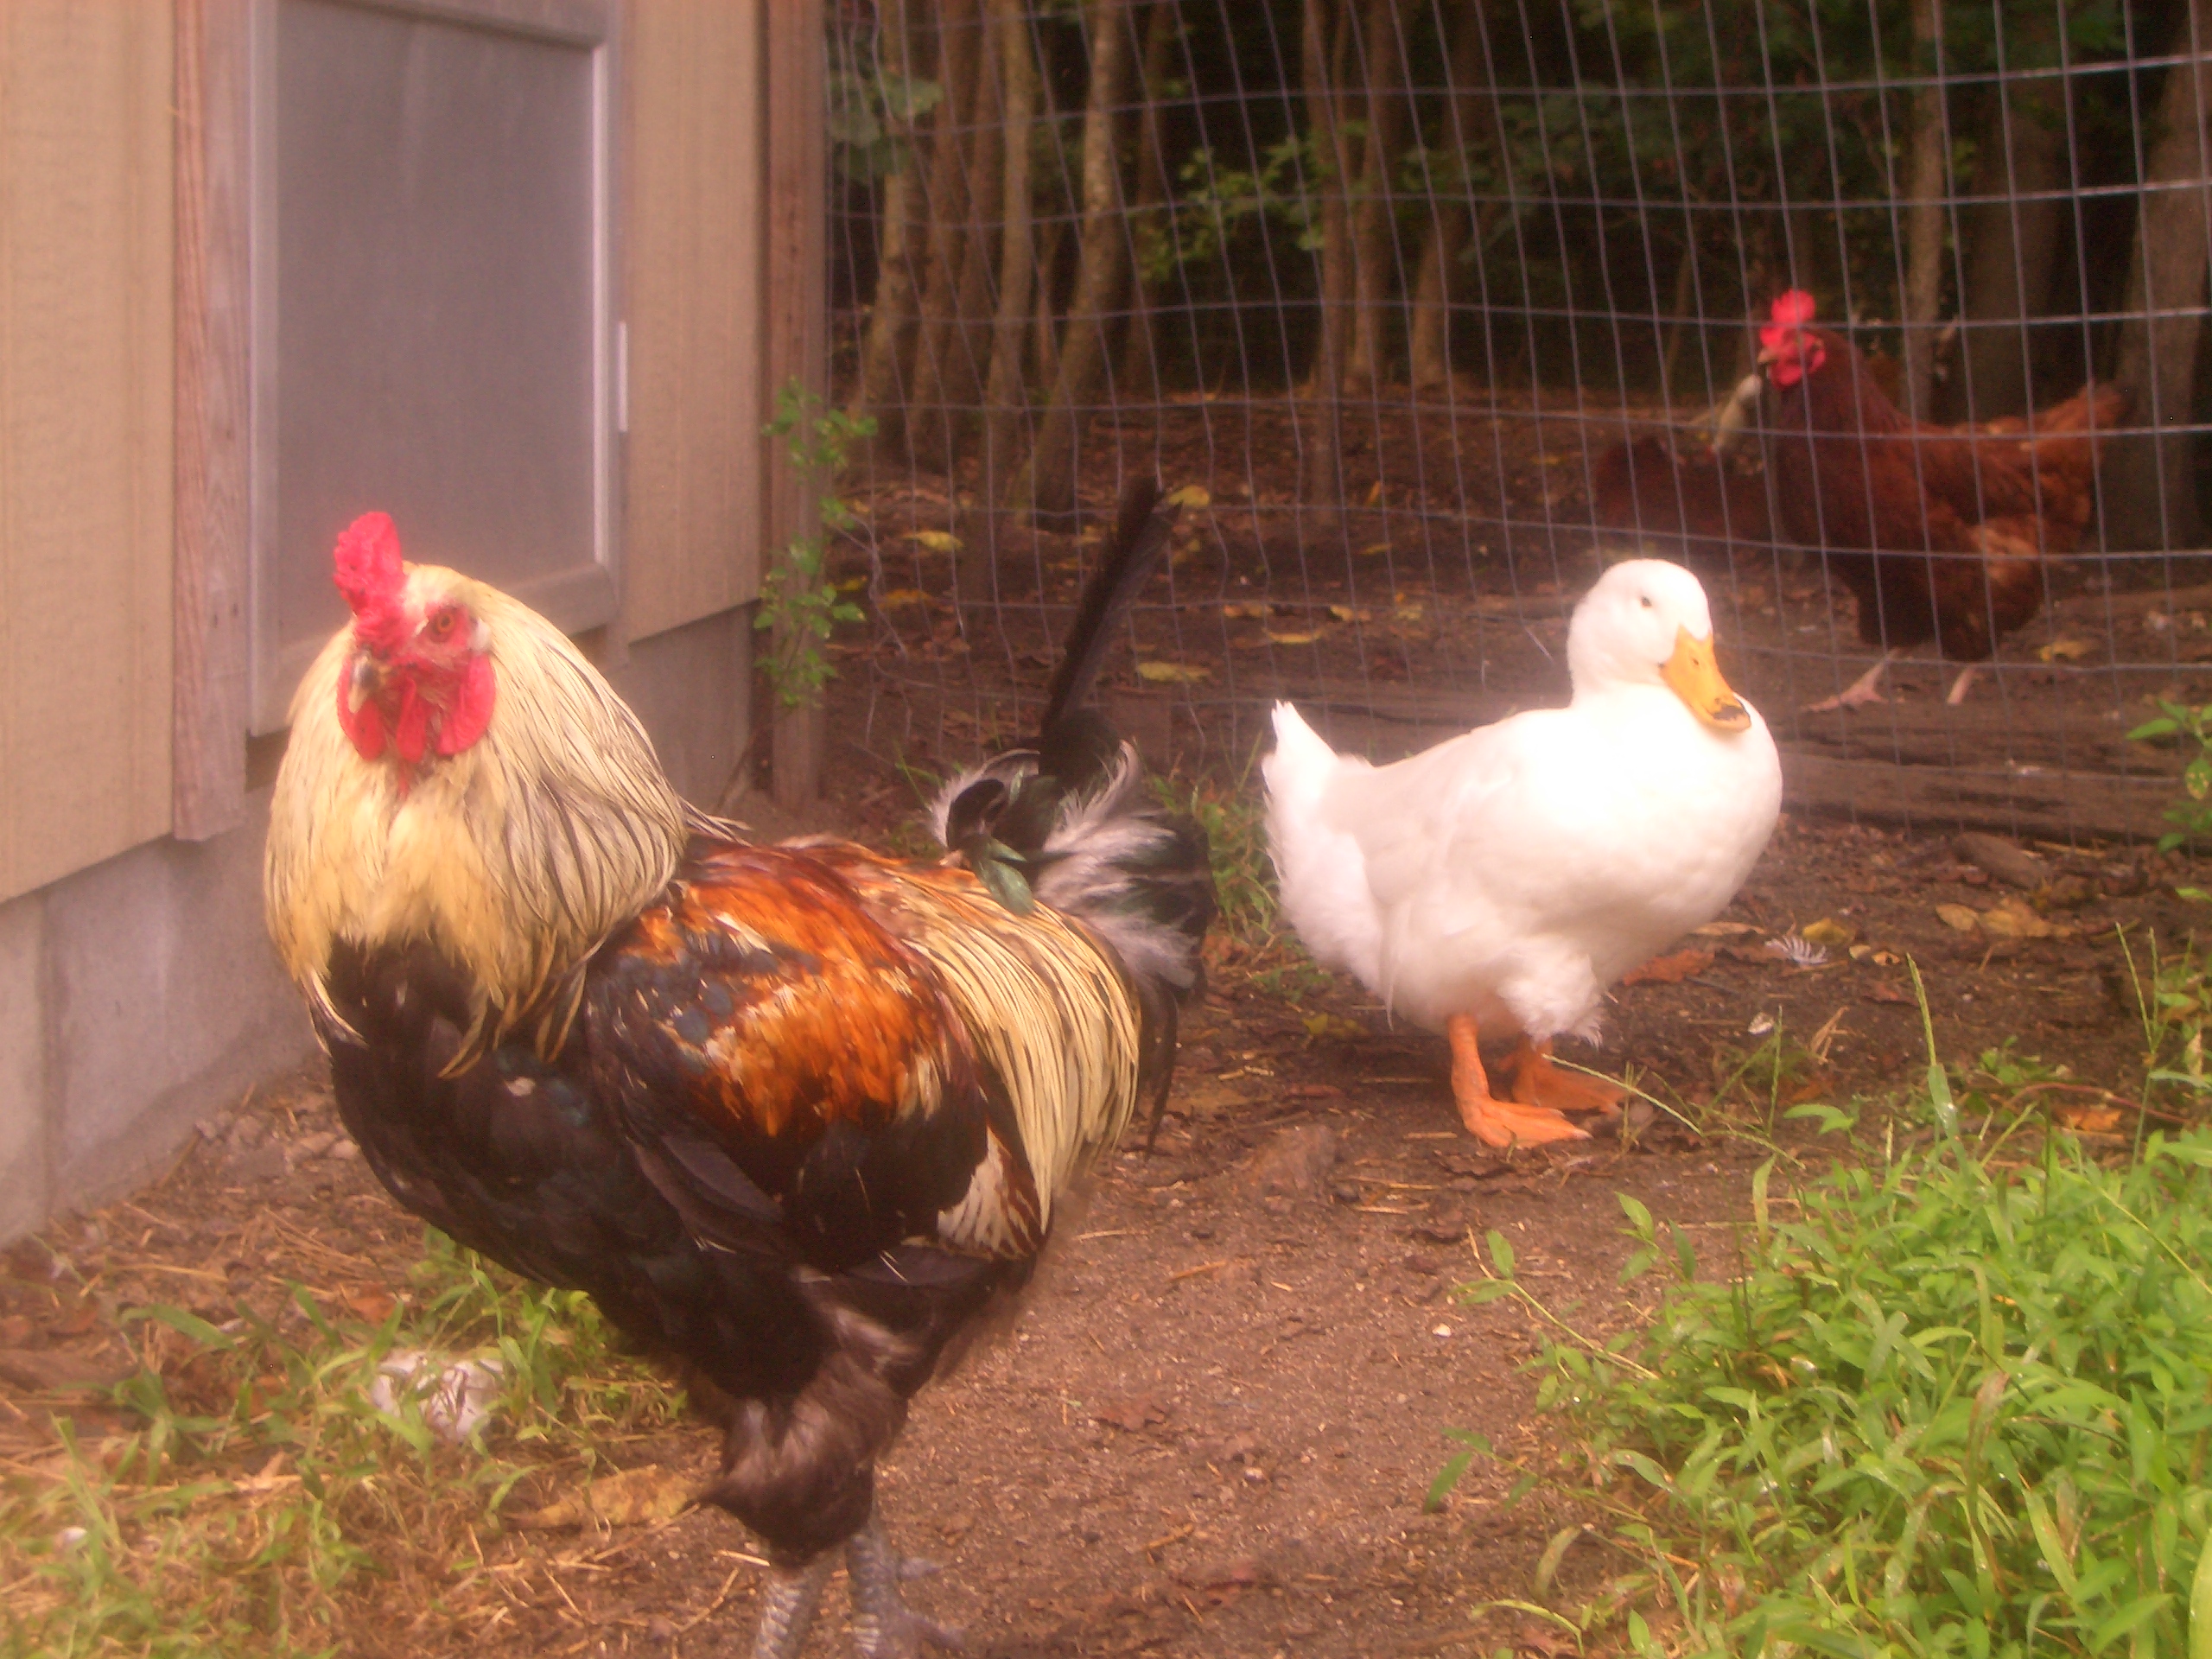 Wild Thing & Daff out side of the coop. She has him duck pecked.